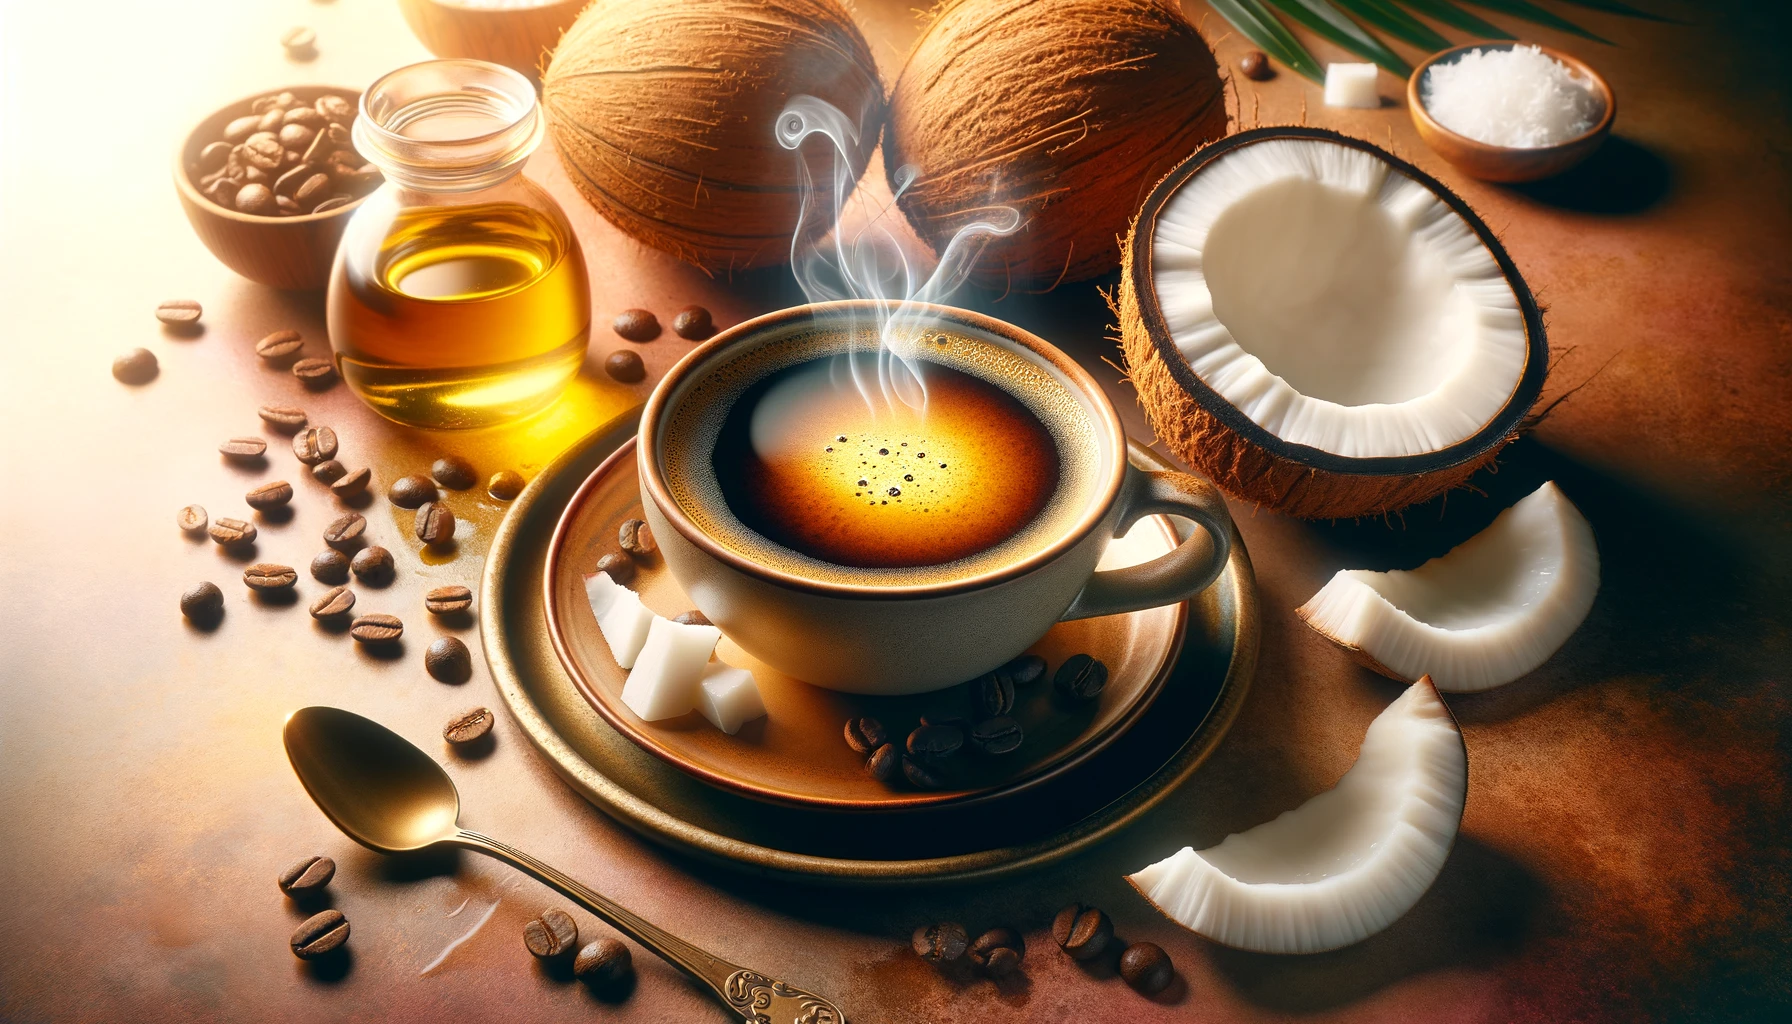 blog featured image about adding coconut oil to coffee